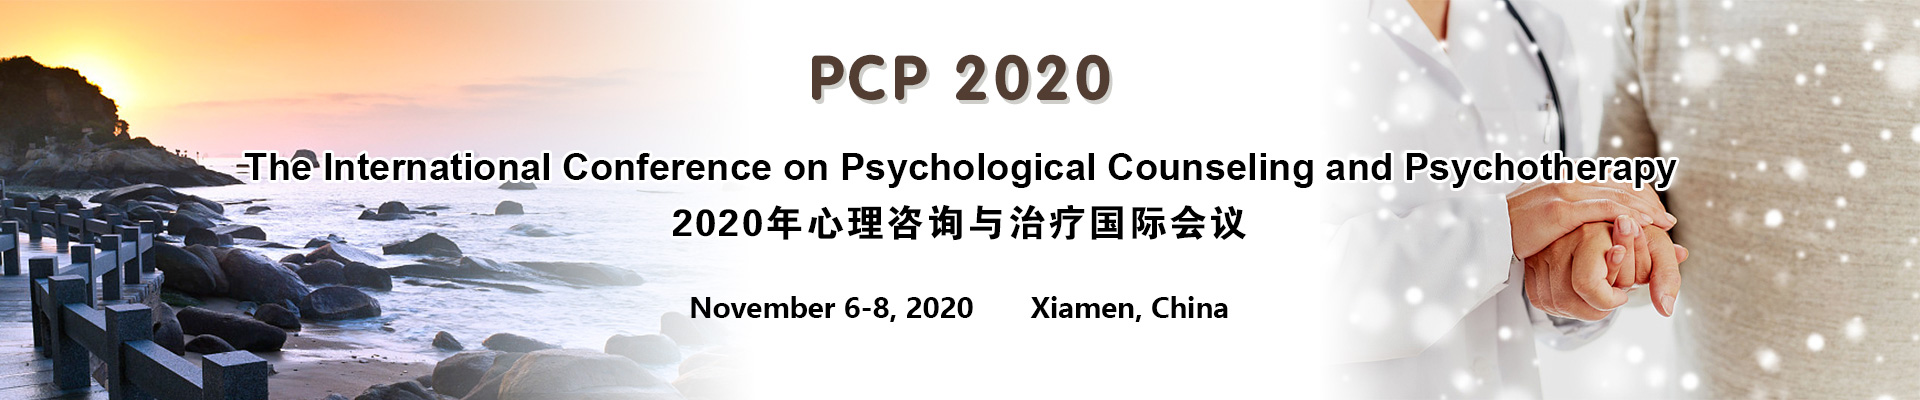 The International Conference on Psychological Counseling and Psychotherapy (PCP 2020), Xiamen, Fujian, China